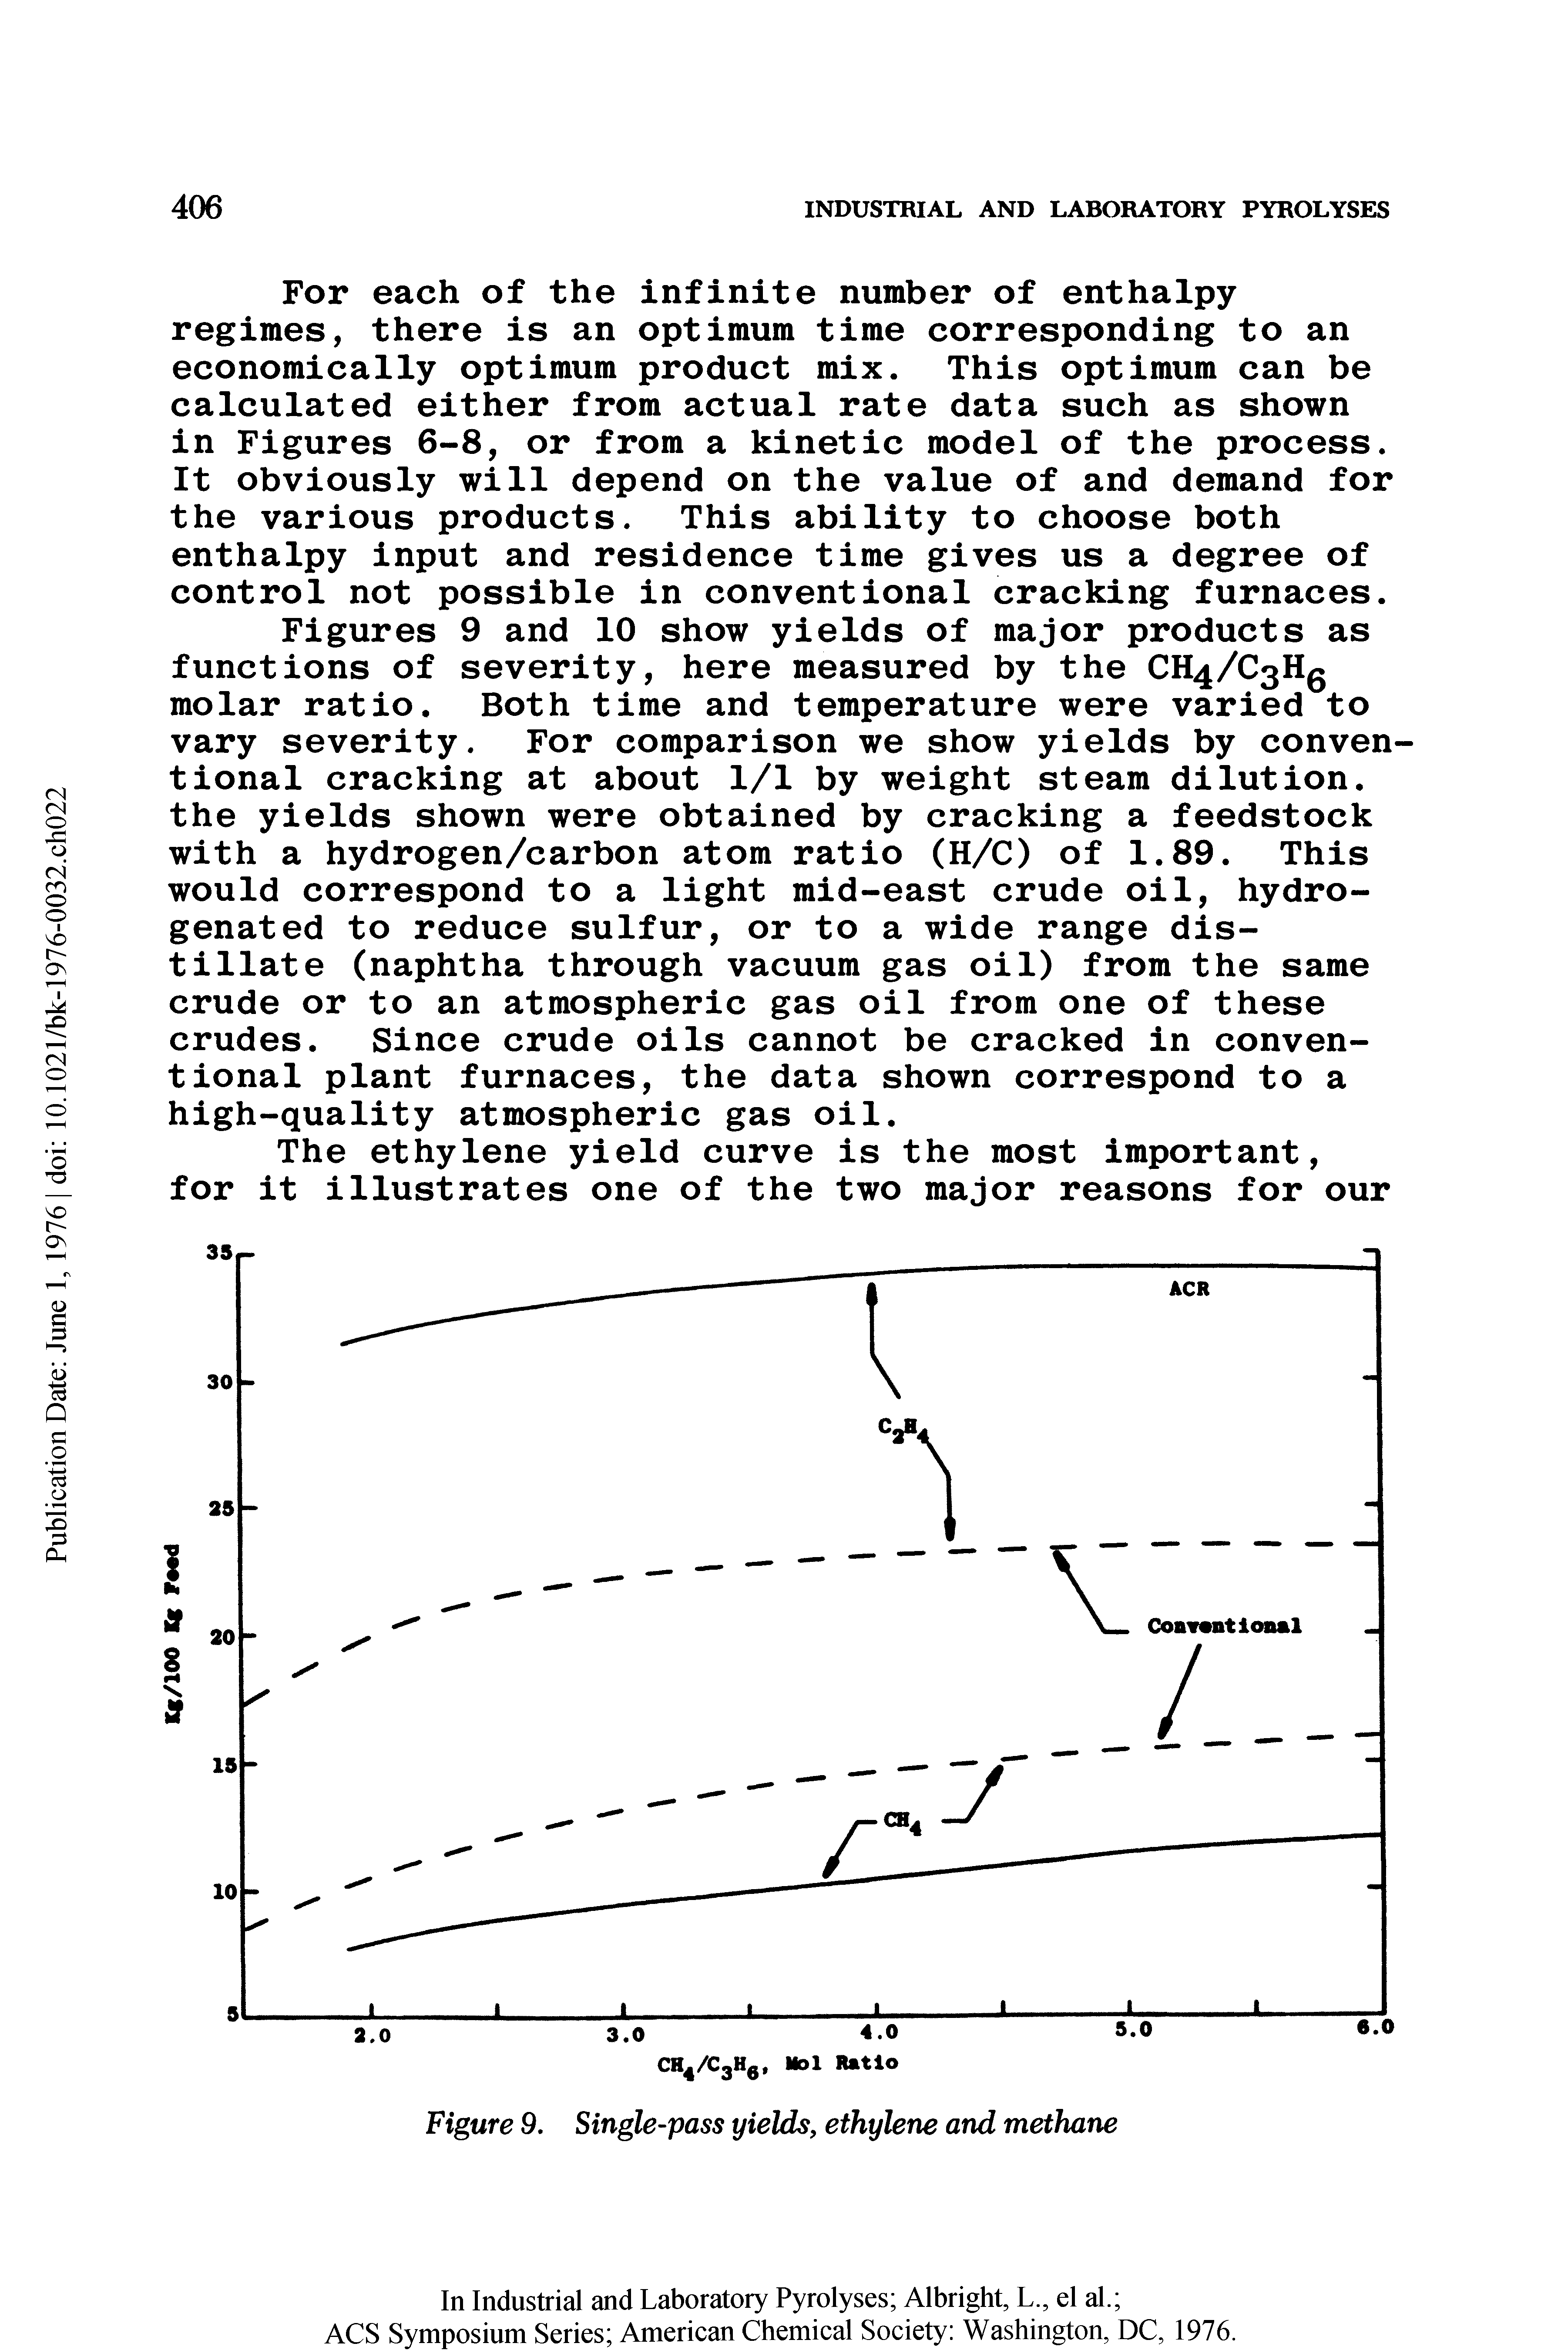 Figures 9 and 10 show yields of major products as functions of severity, here measured by the CH4/C3H0 molar ratio. Both time and temperature were varied to vary severity. For comparison we show yields by conventional cracking at about 1/1 by weight steam dilution, the yields shown were obtained by cracking a feedstock with a hydrogen/carbon atom ratio (H/C) of 1.89. This would correspond to a light mid-east crude oil, hydrogenated to reduce sulfur, or to a wide range distillate (naphtha through vacuum gas oil) from the same crude or to an atmospheric gas oil from one of these crudes. Since crude oils cannot be cracked in conventional plant furnaces, the data shown correspond to a high-quality atmospheric gas oil.